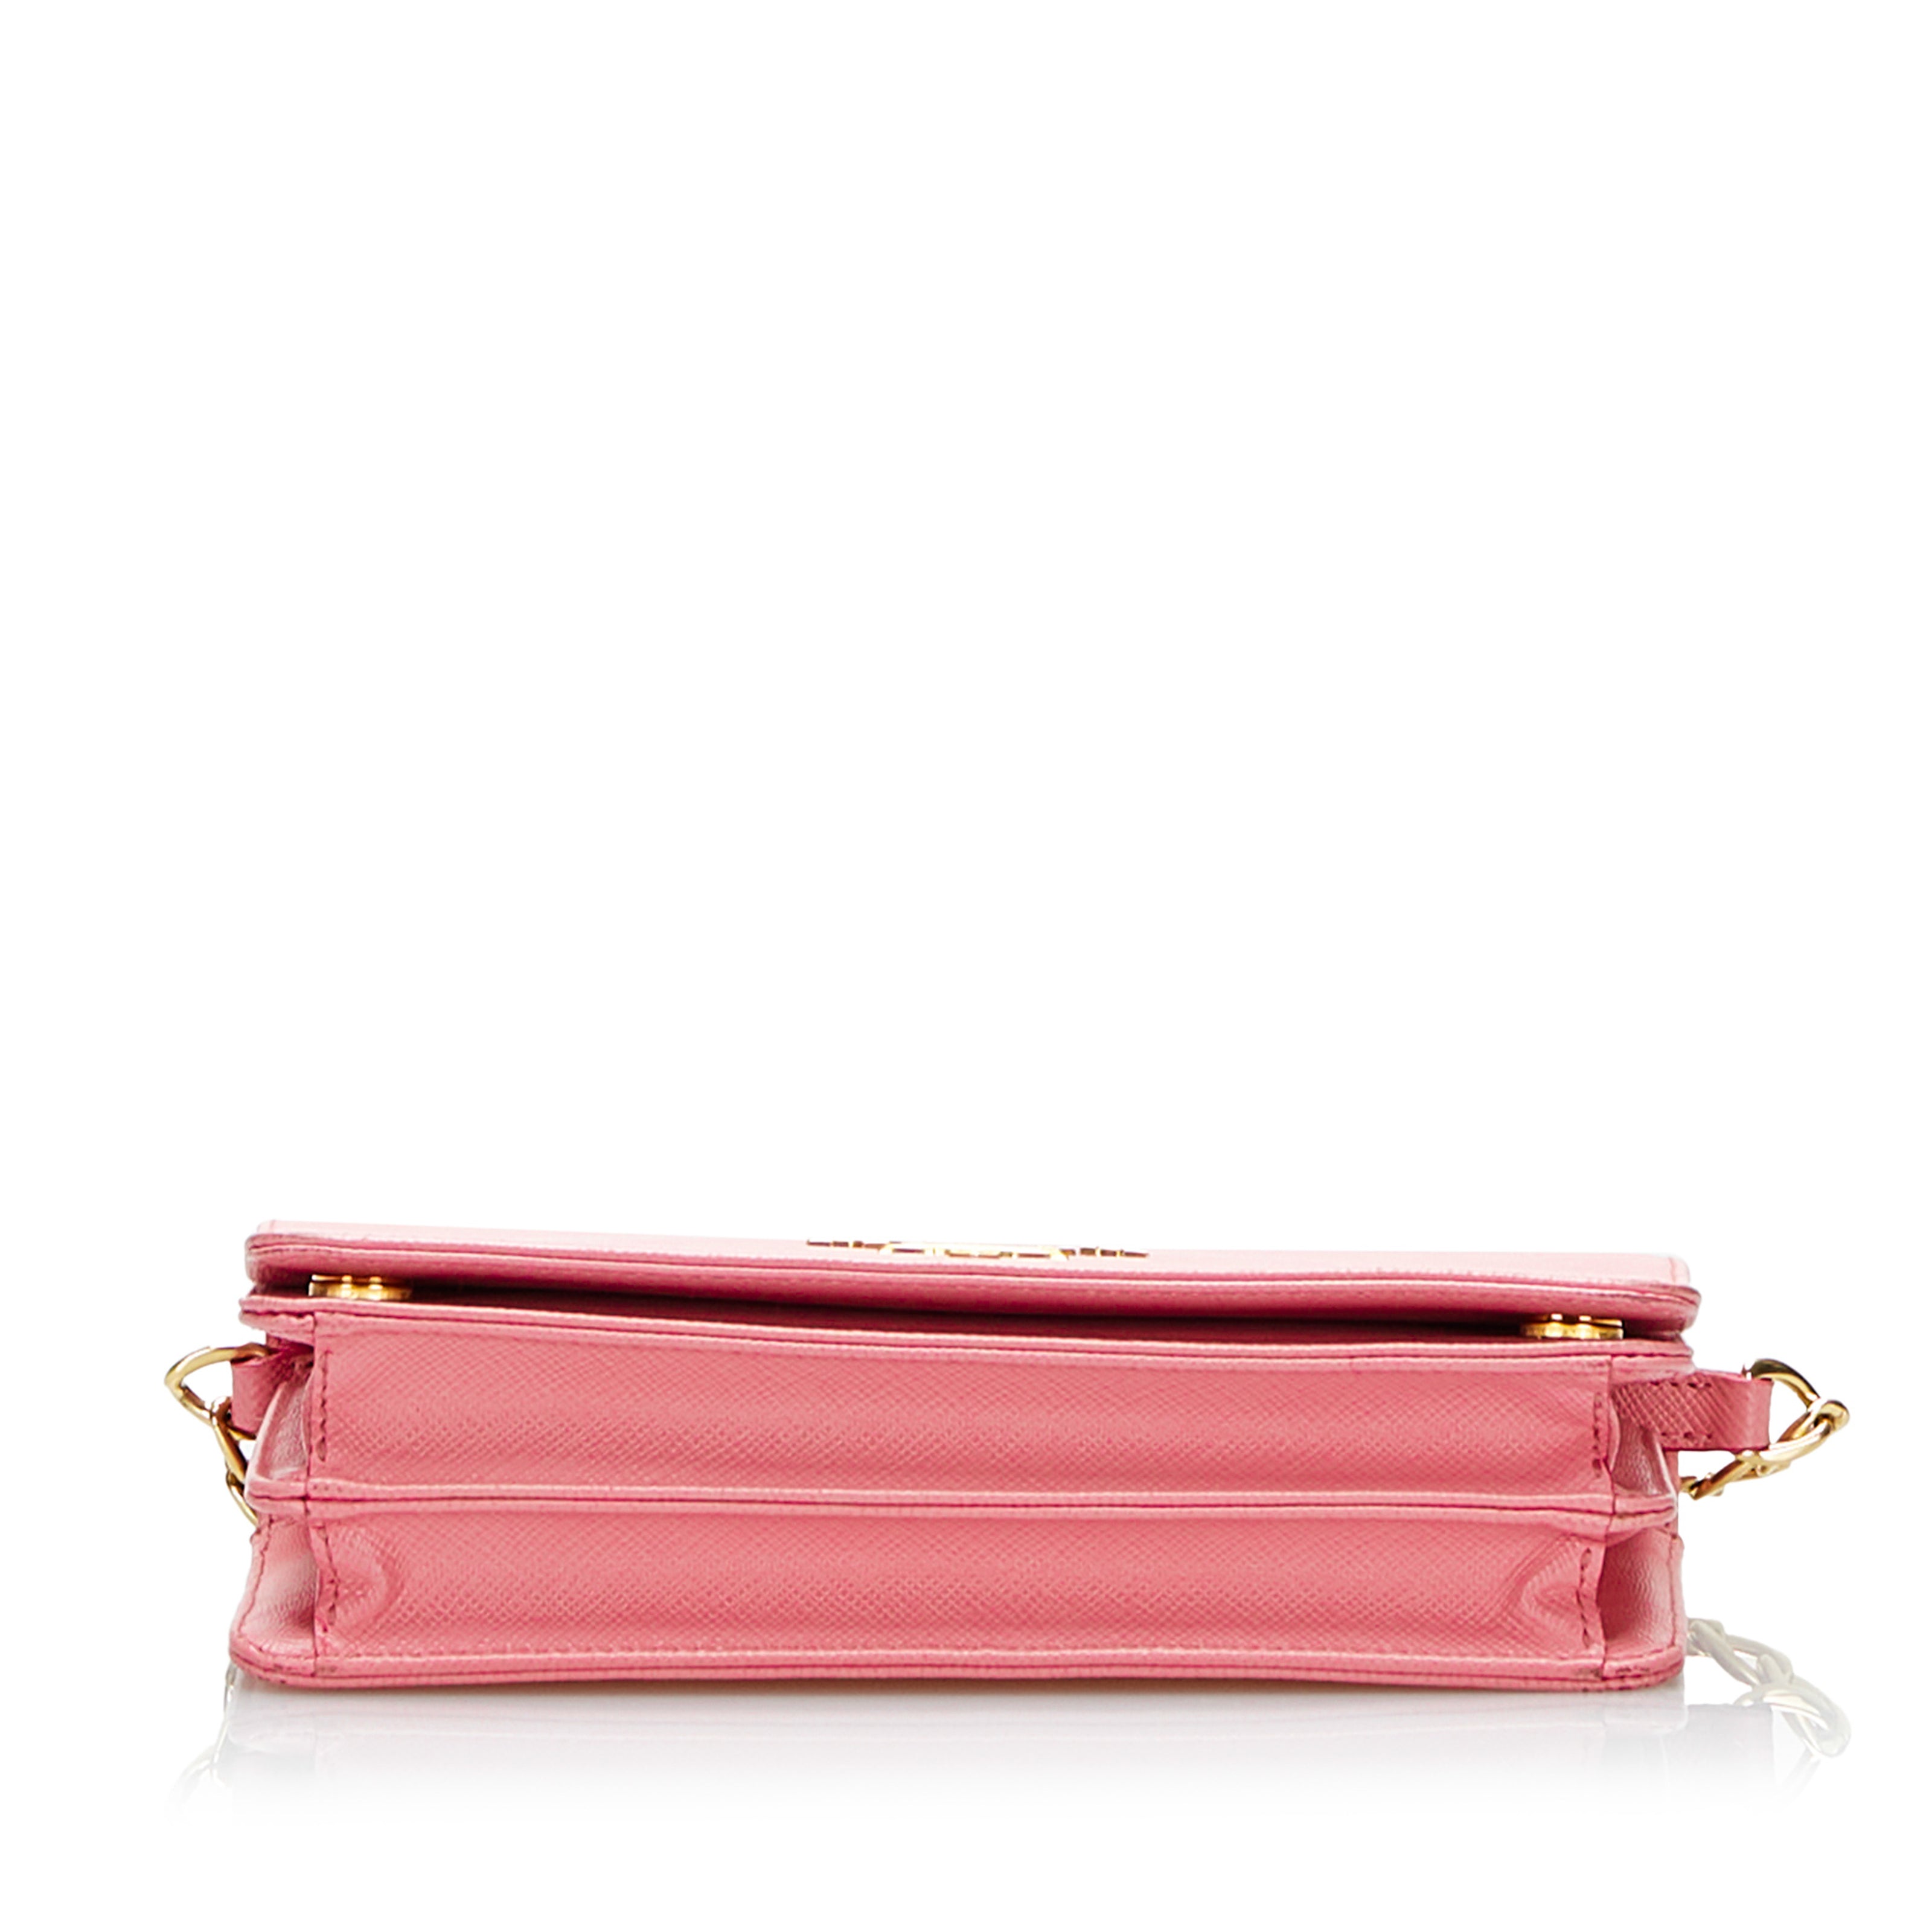 Fall In Love With the Prada Pink Leather Wallet on Chain